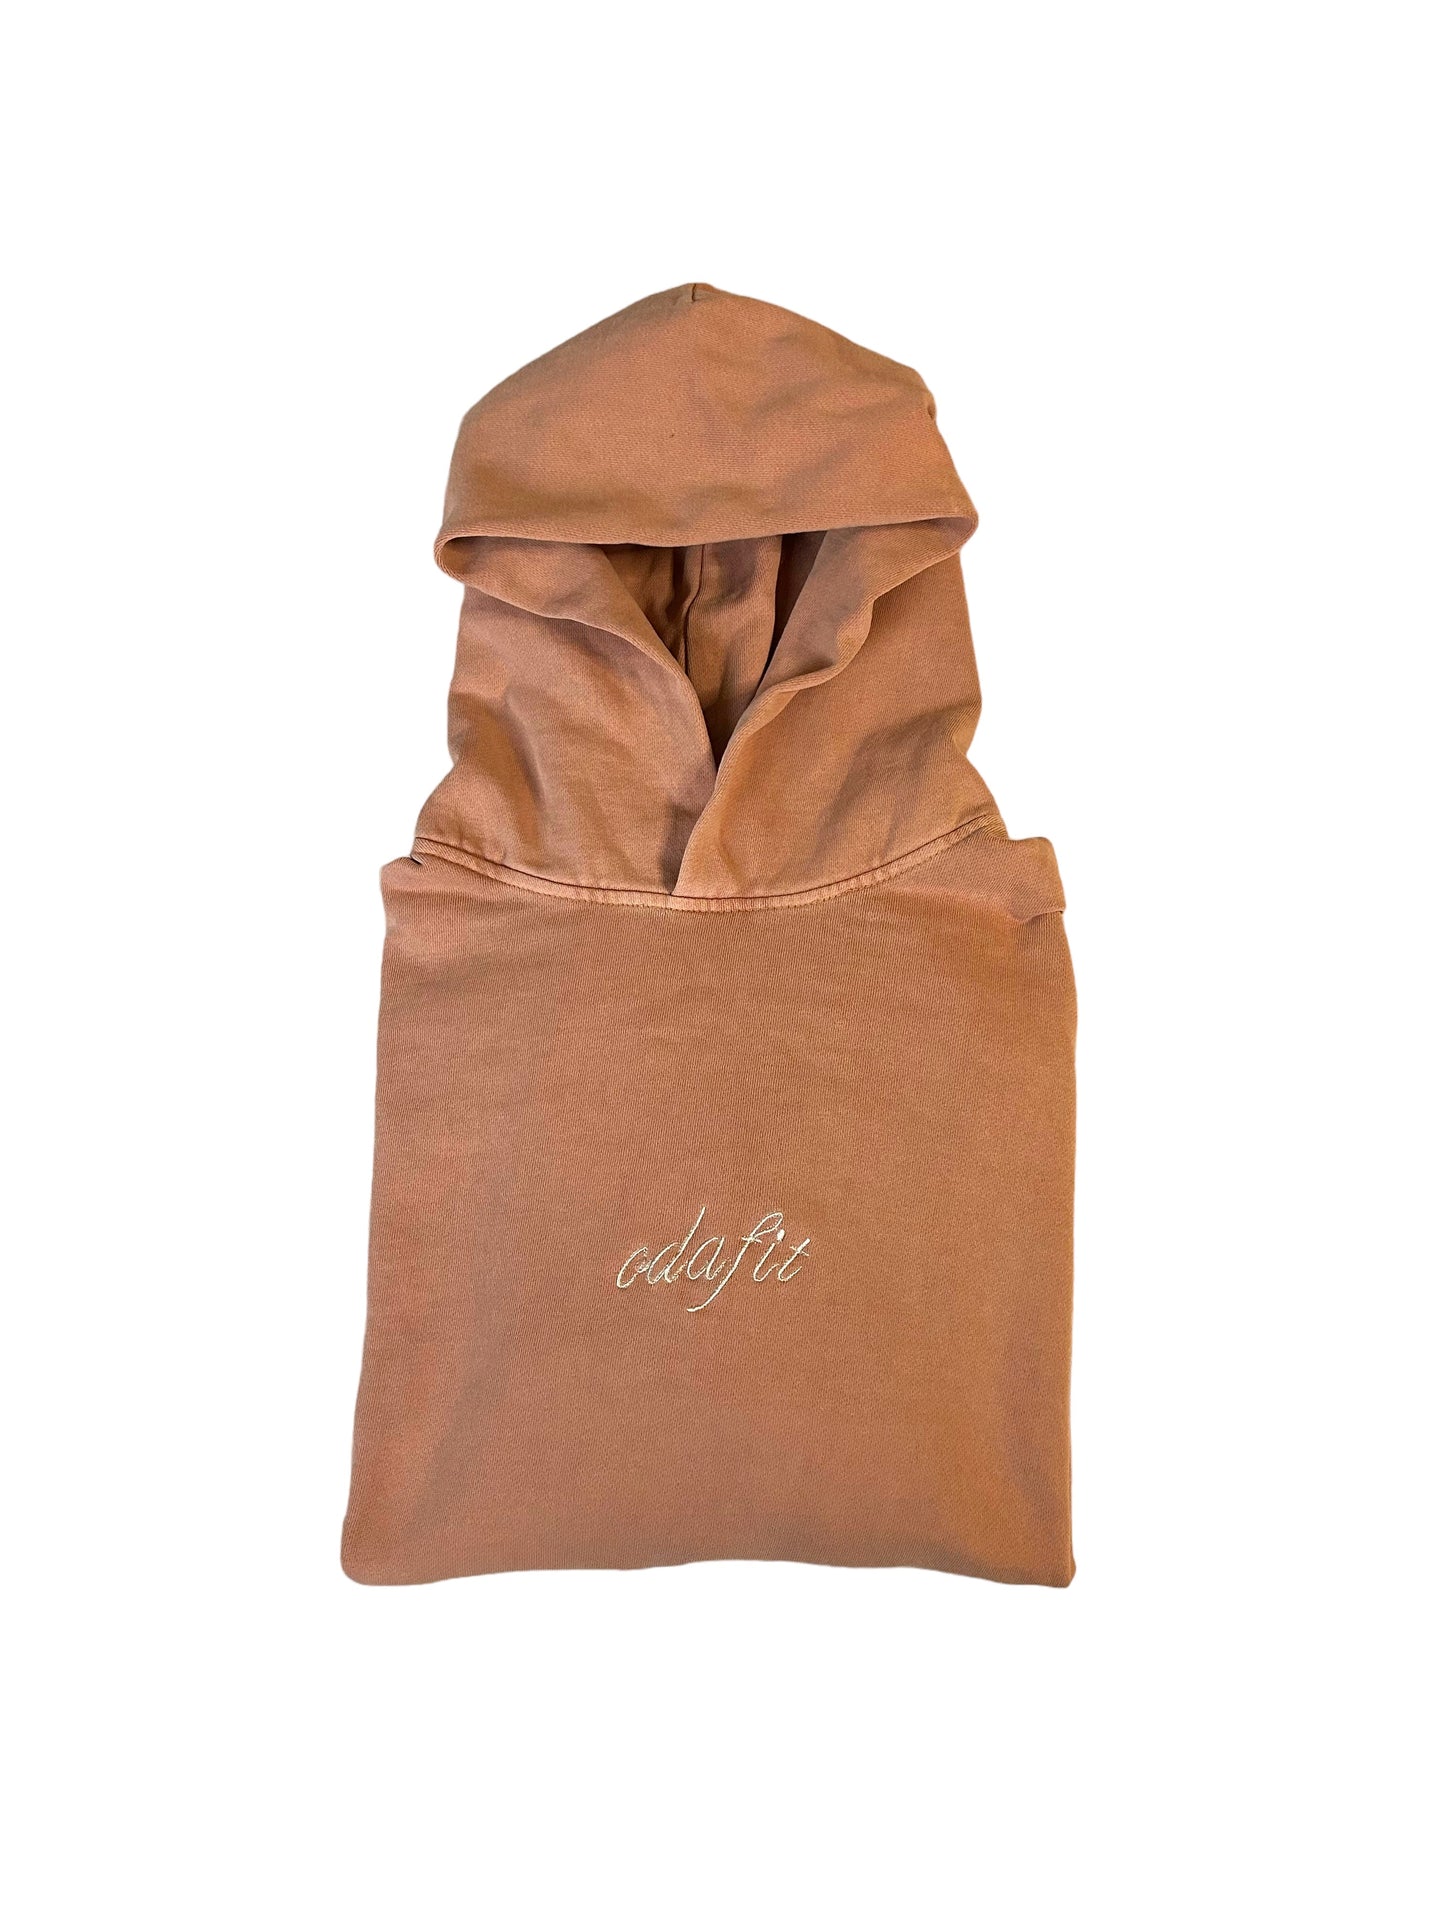 ODA FIT MELLOW HOODIE